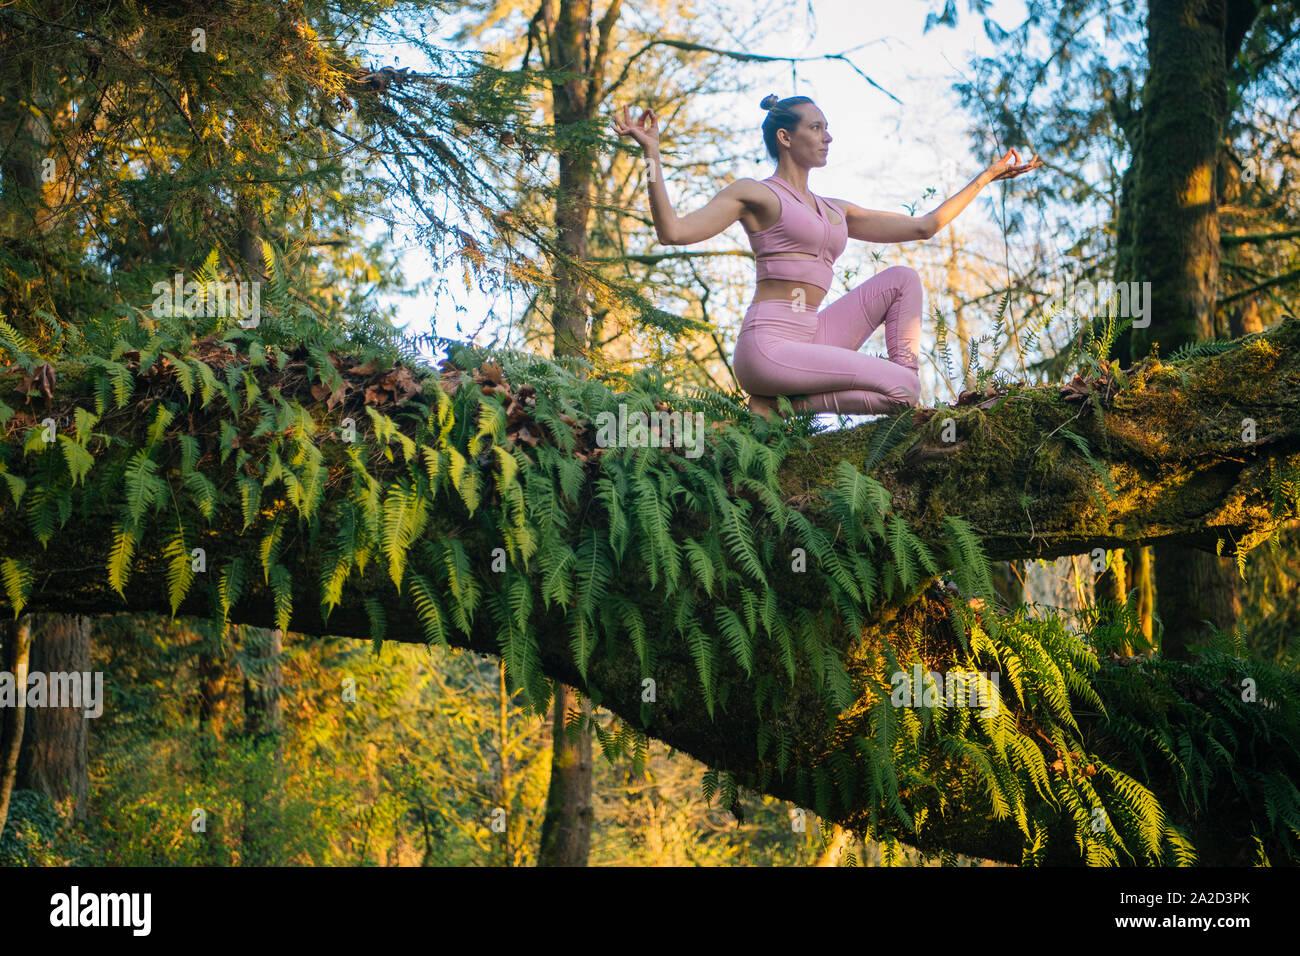 View of young woman in yoga pose in forest, Bainbridge Island, Washington, USA Stock Photo